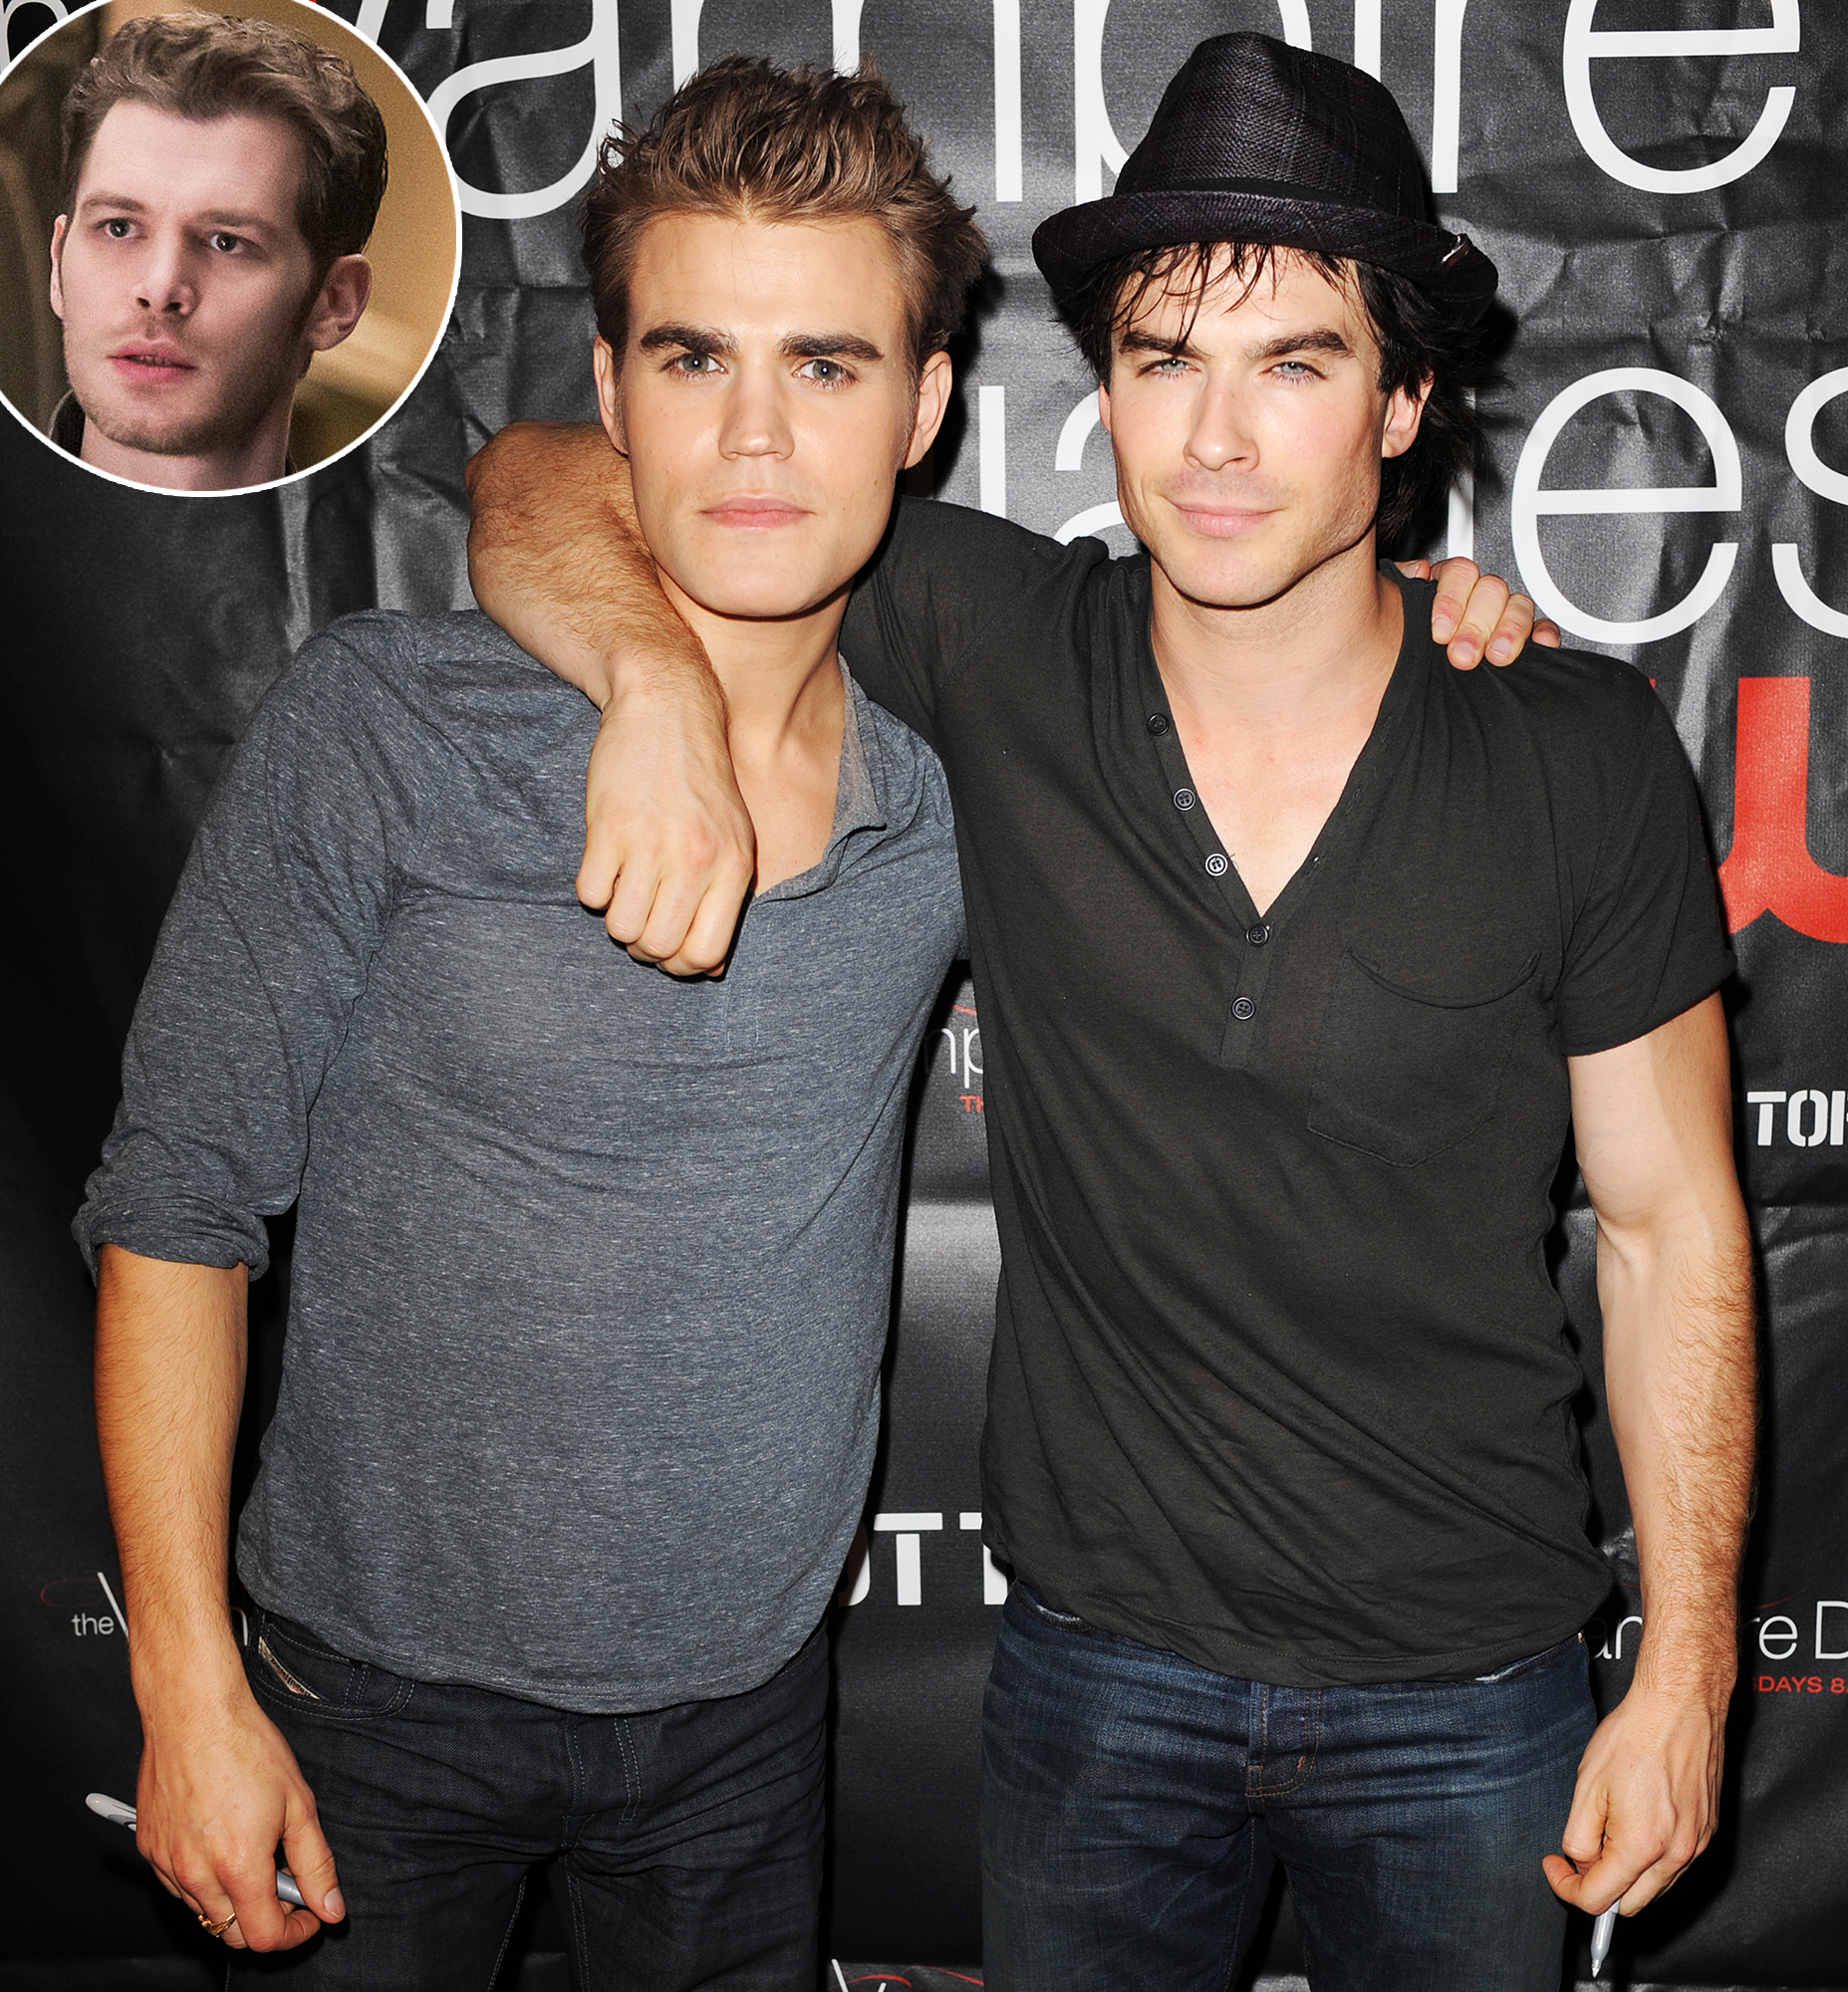 Claire holt dating paul wesley